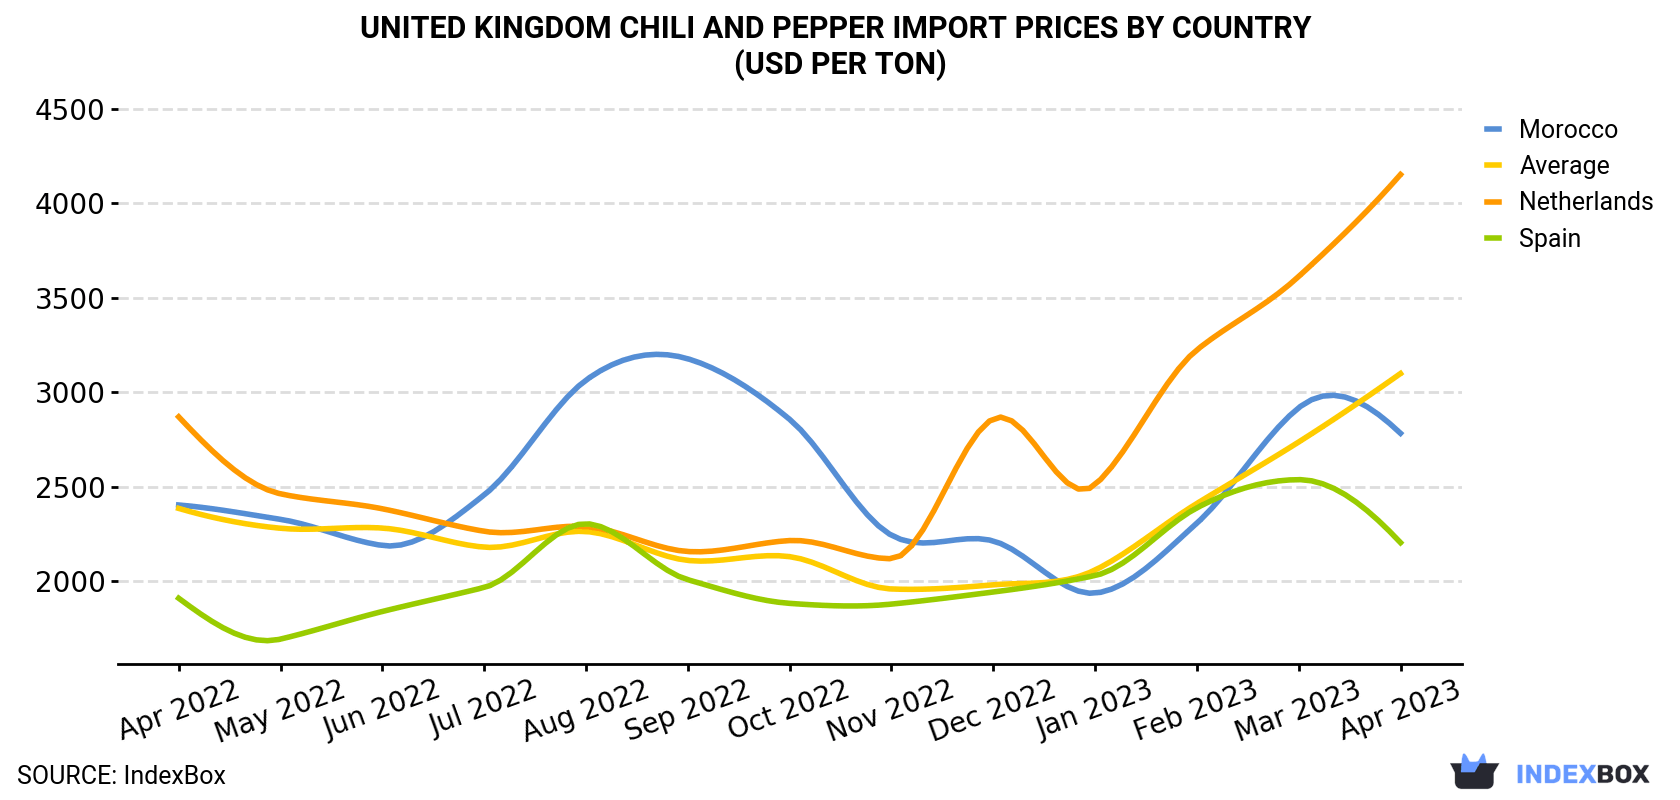 United Kingdom Chili And Pepper Import Prices By Country (USD Per Ton)